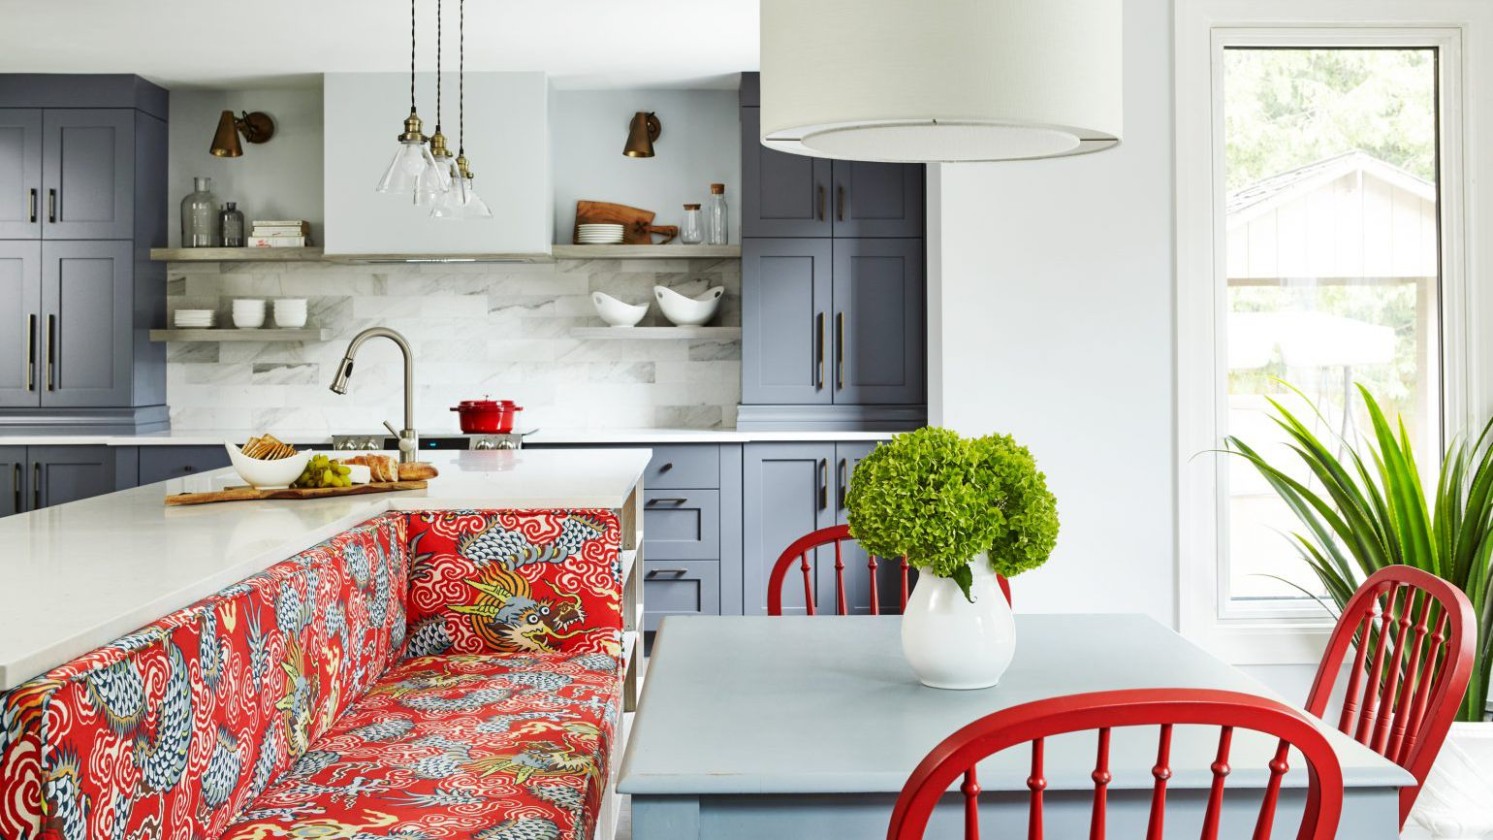 7 Colorful Kitchen Ideas to Brighten Your Cooking Space - funky kitchen ideas